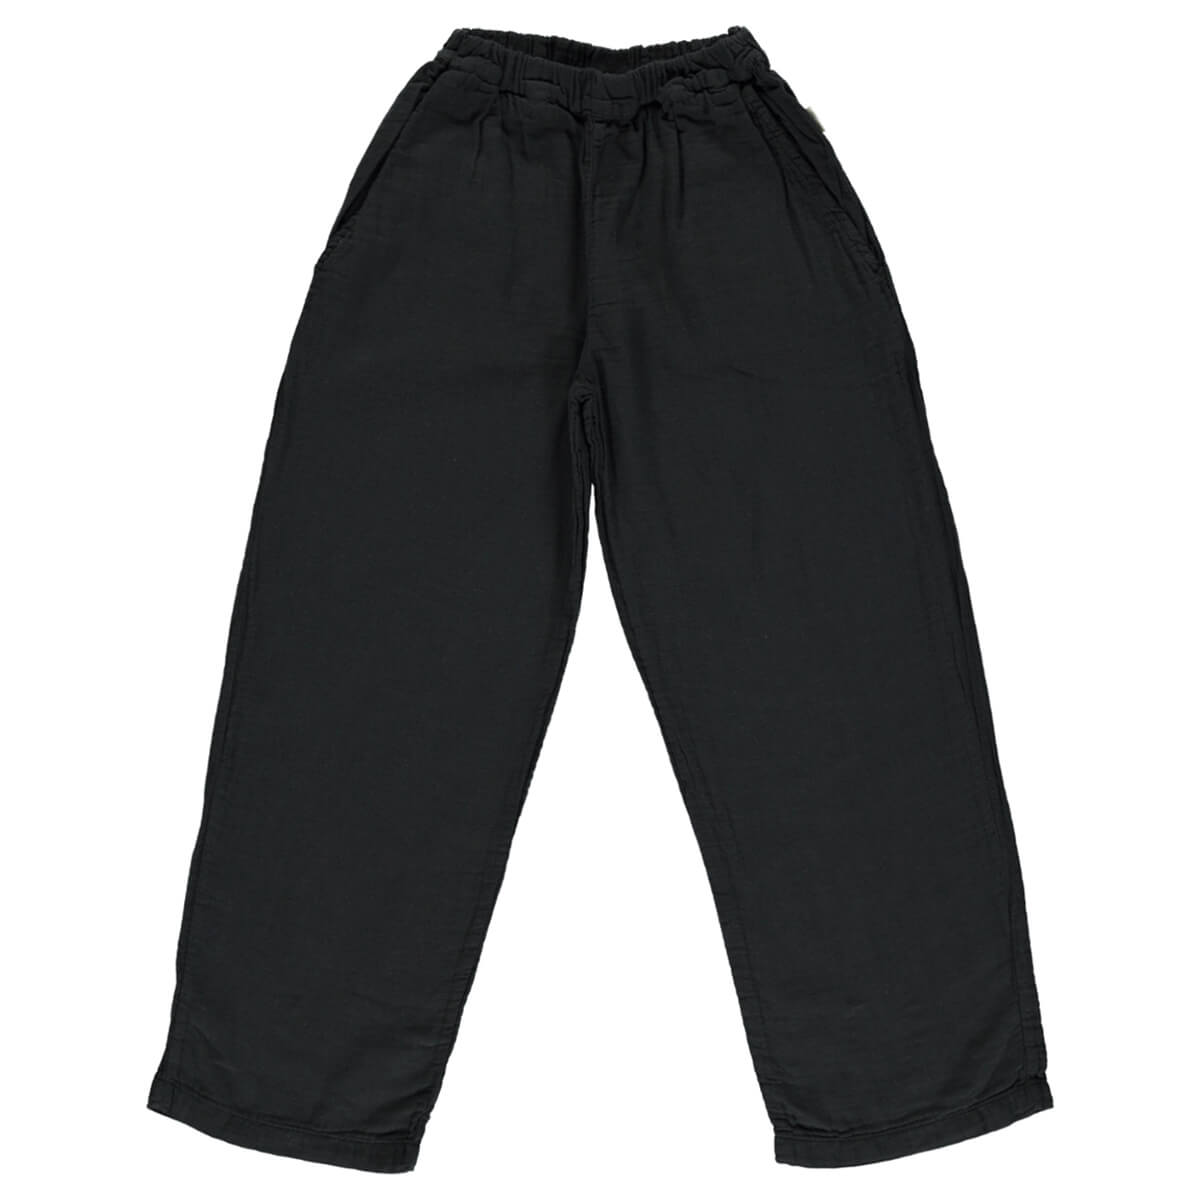 Pomelos Baby Pants in Pirate Black by Poudre Organic - Last Ones In St ...